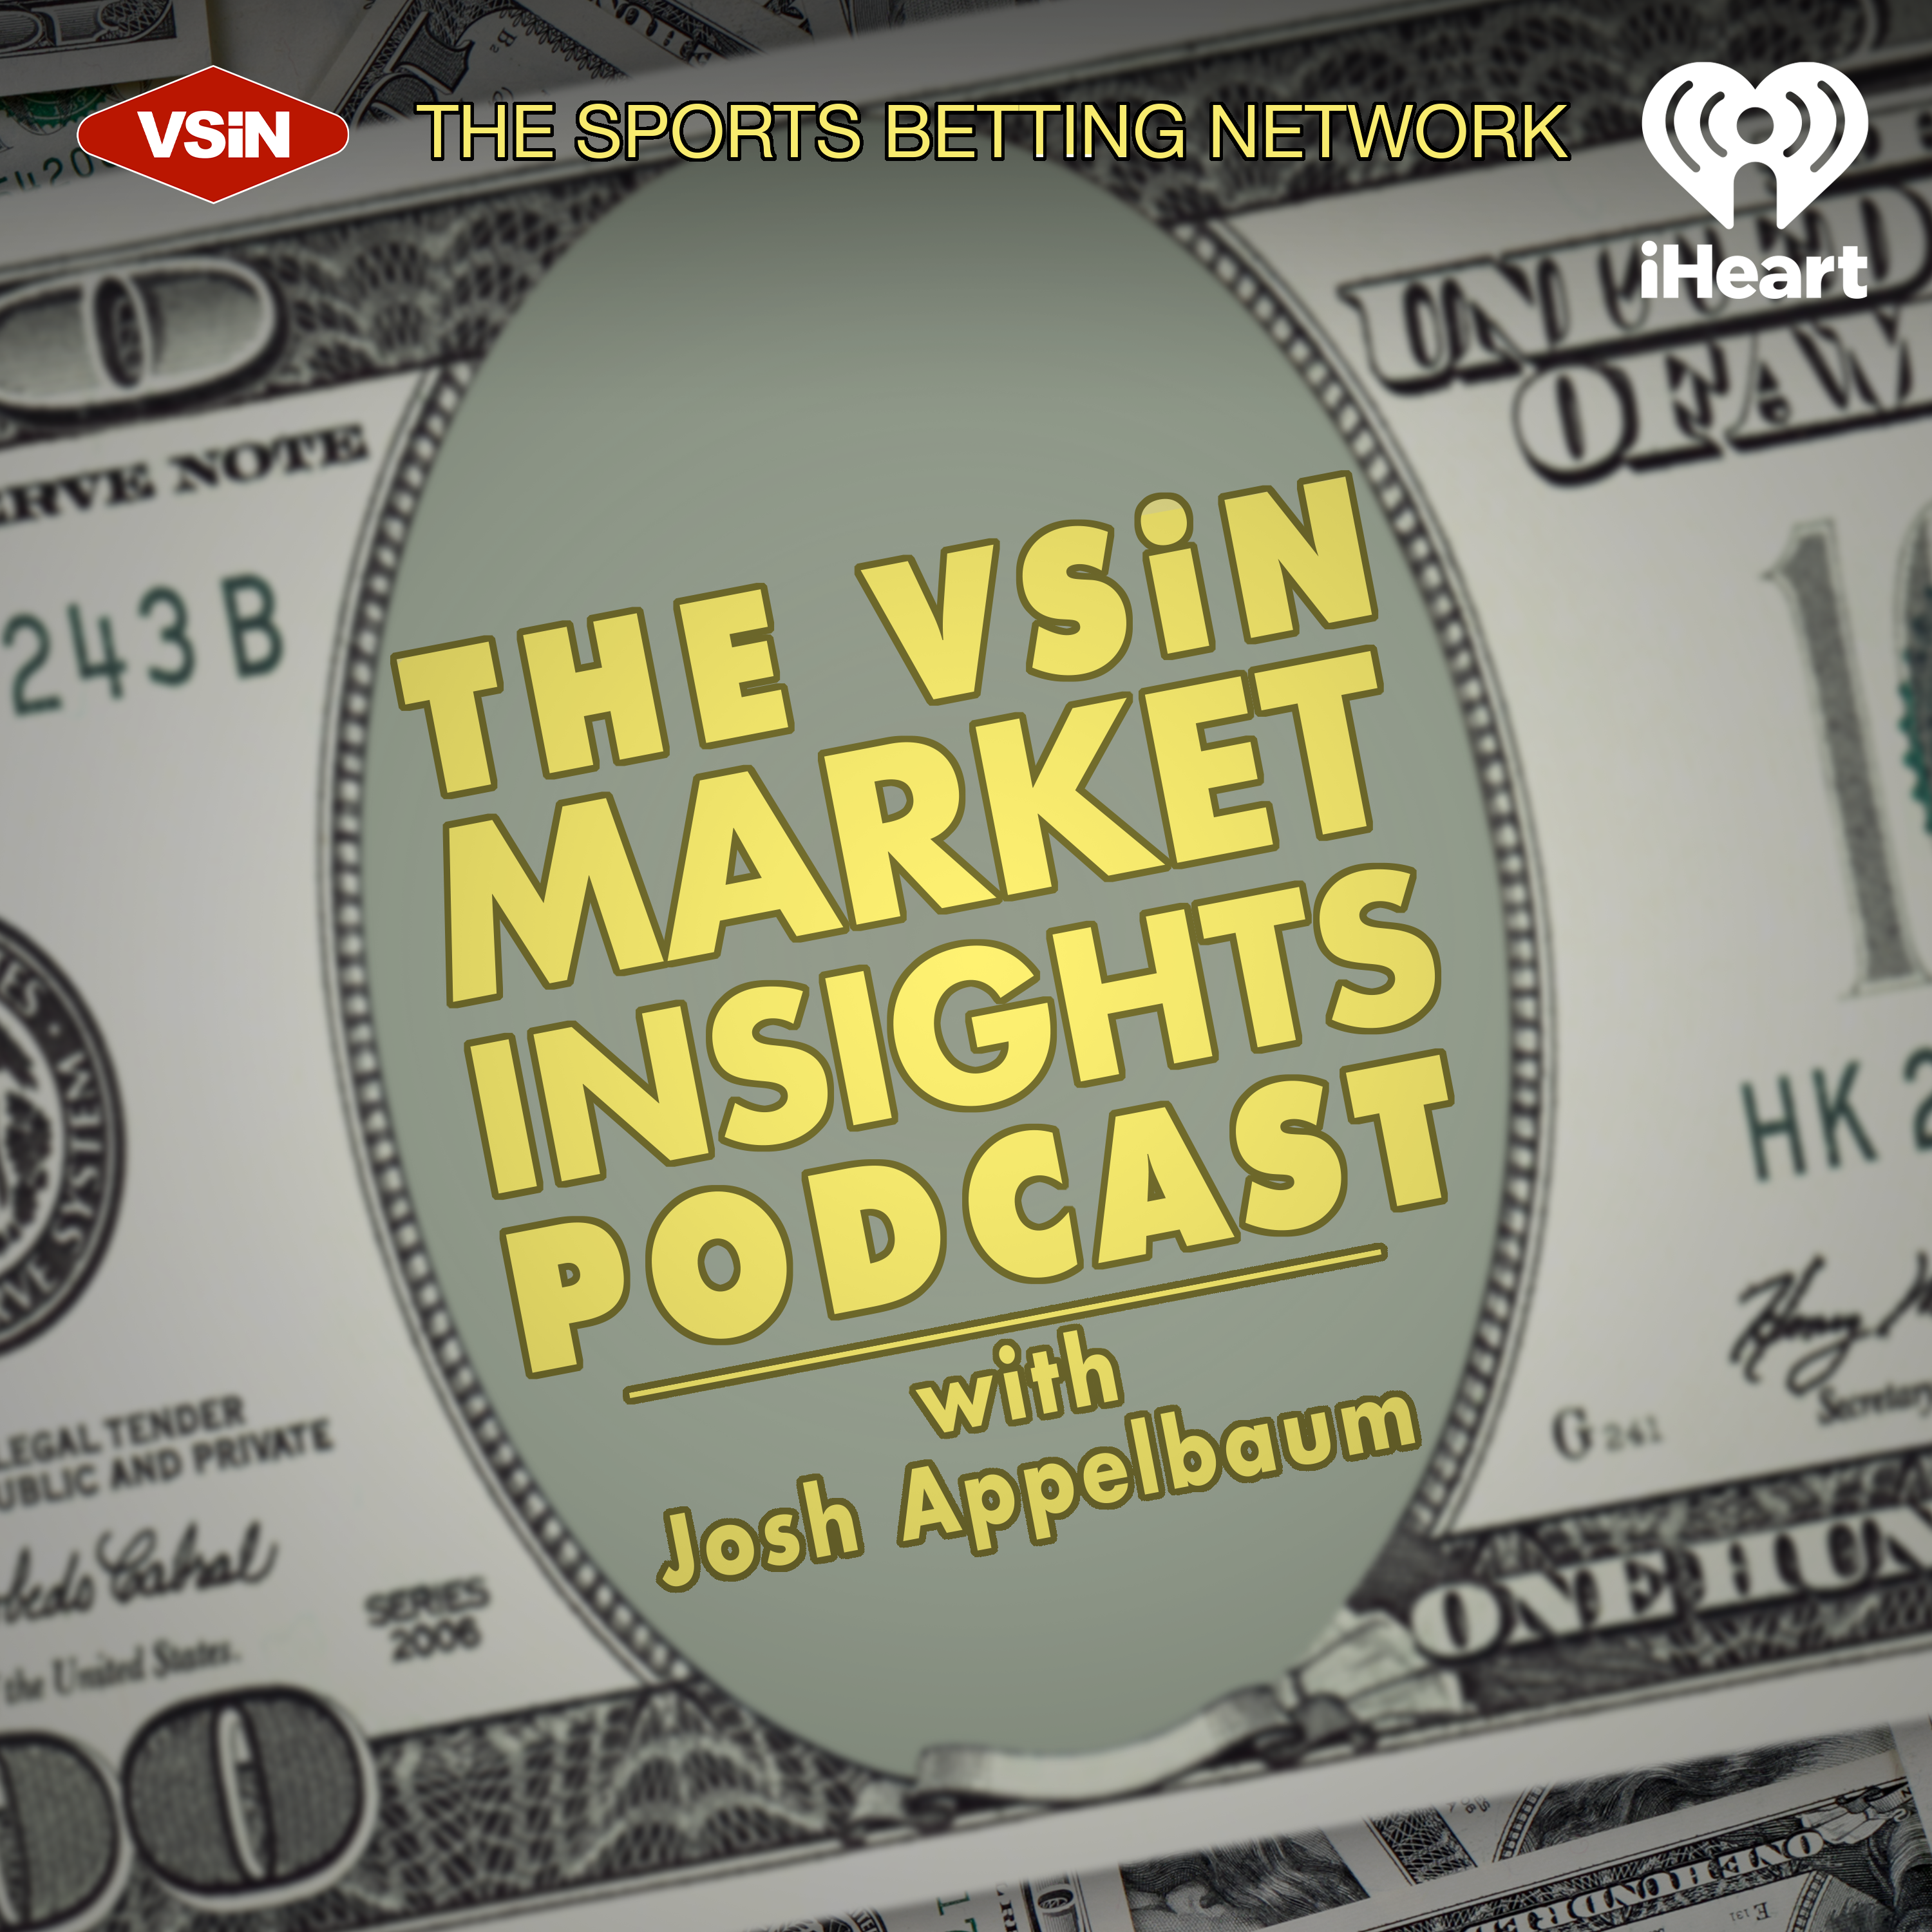 The VSiN Market Insights Podcast with Josh Appelbaum | April 25, 2022